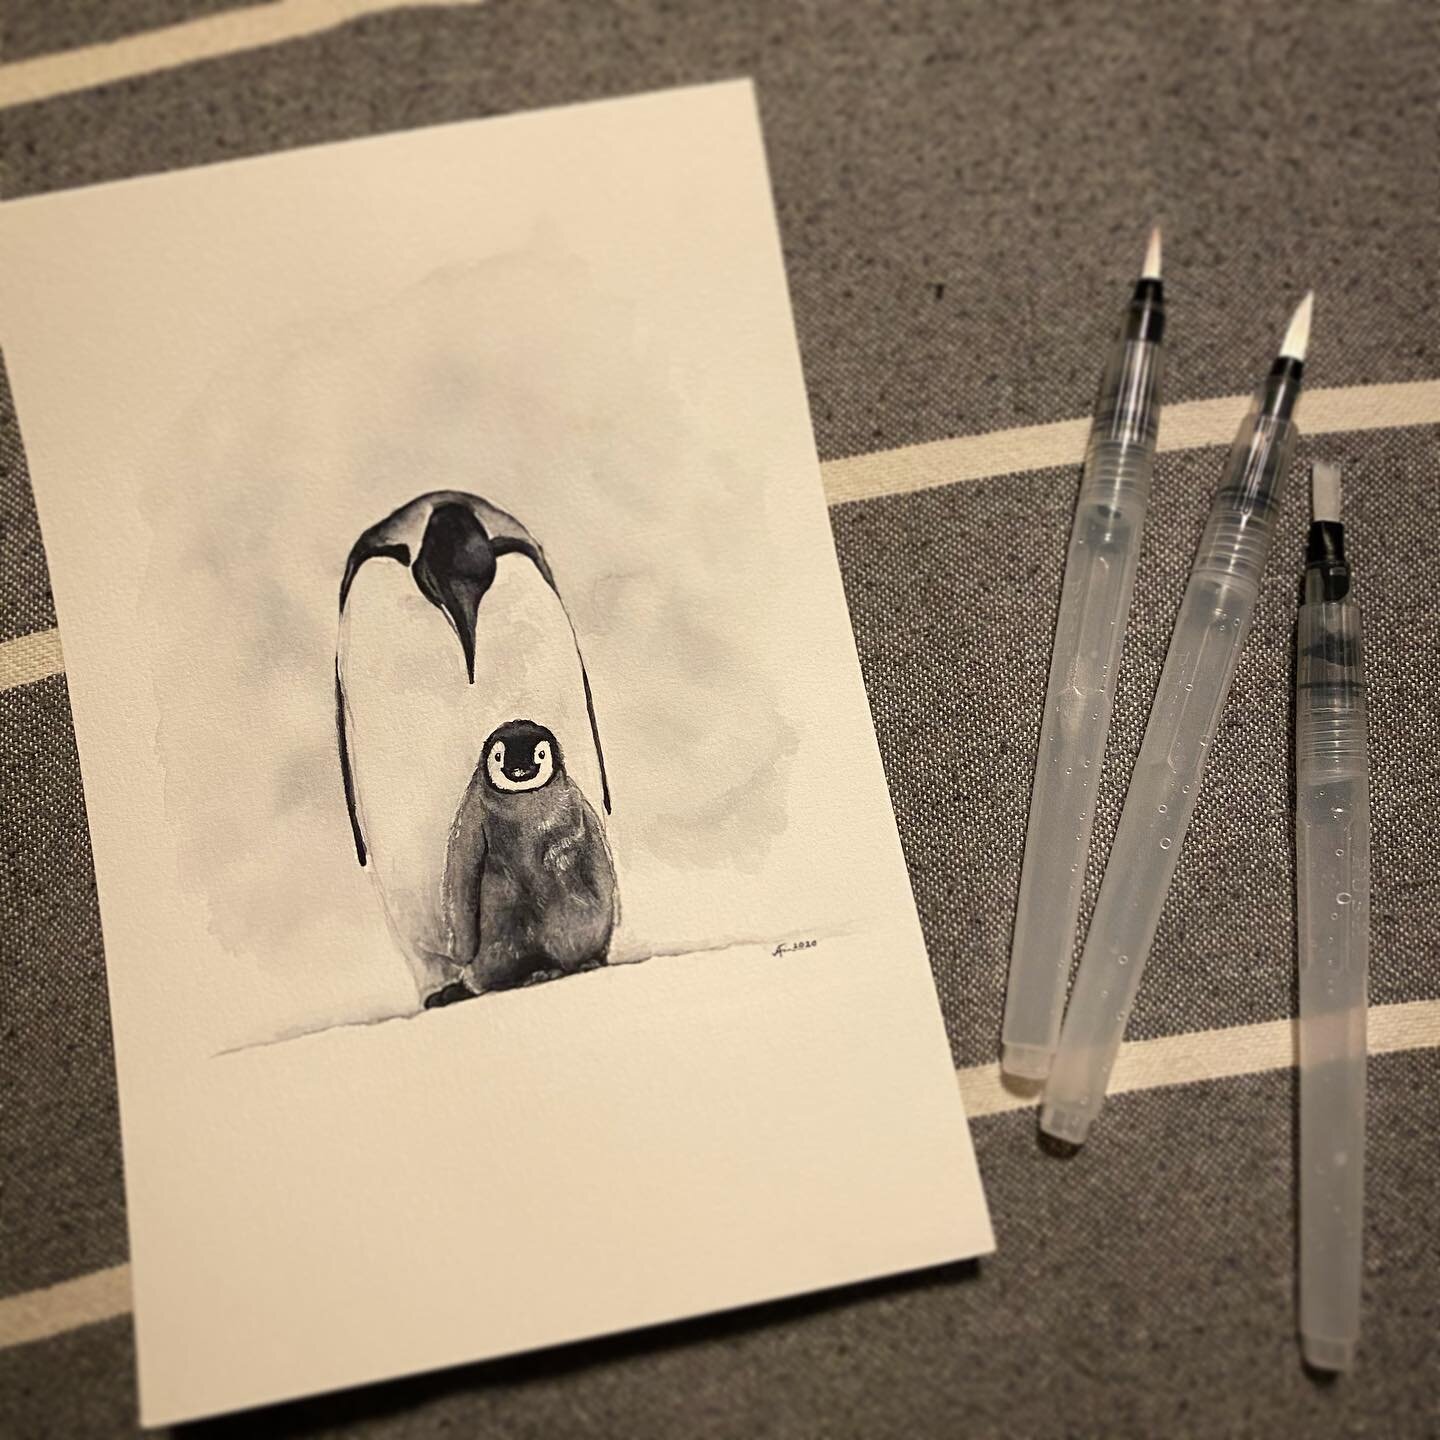 My first experiment with the magic that is the #waterbrushpen! I can&rsquo;t believe it took me this long to try these out.
&bull;
#latergram #penguin #penguinbaby @artezaofficial @winsorandnewton